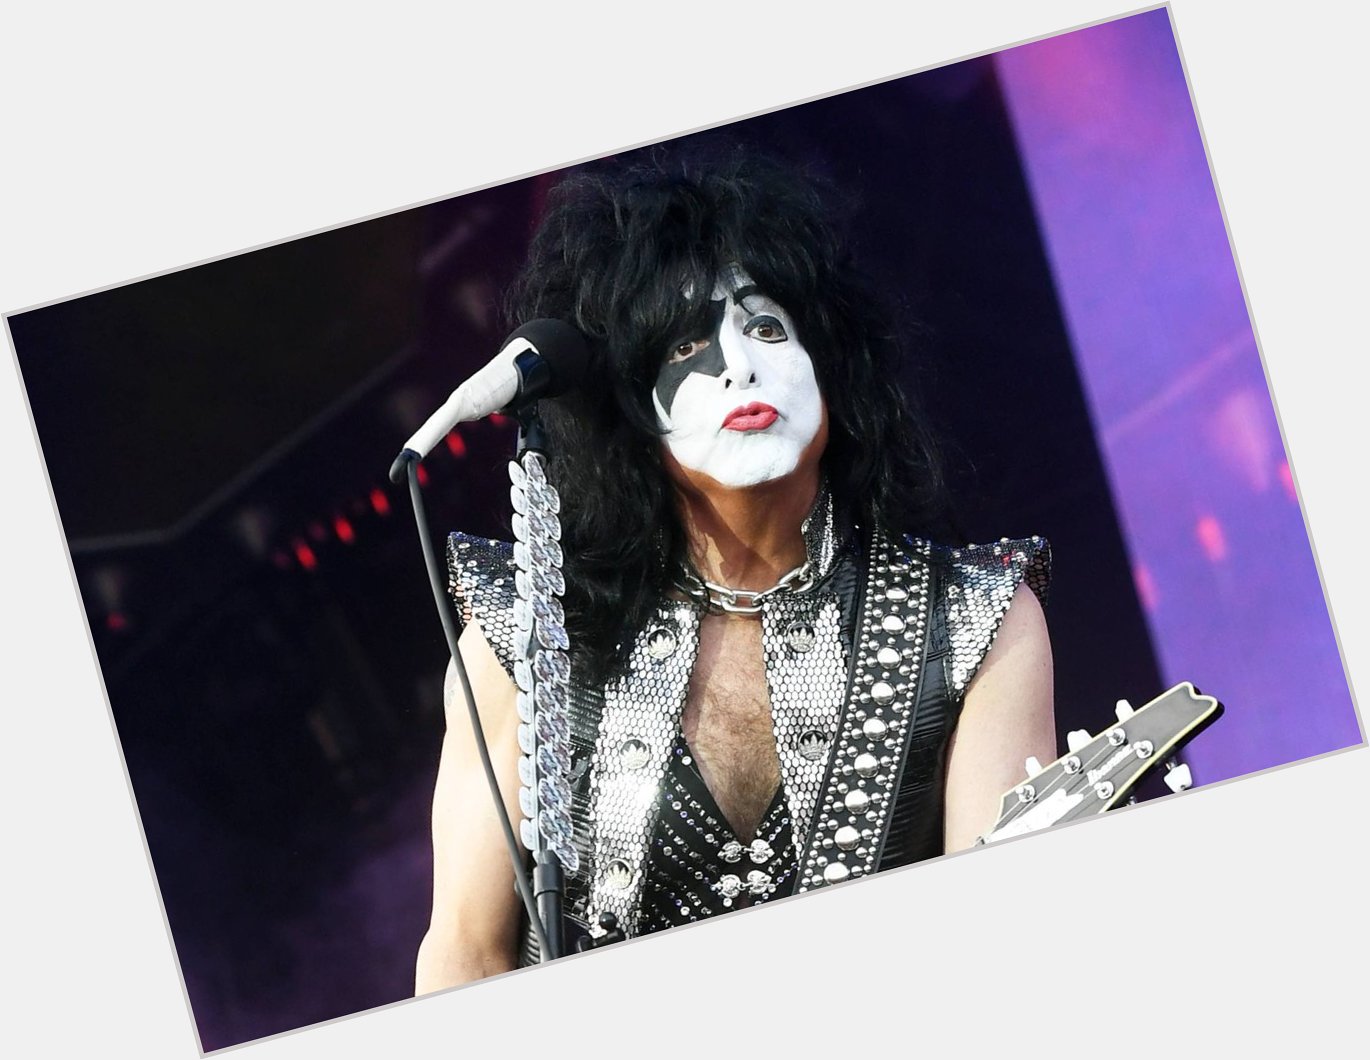 Happy Birthday to Paul Stanley who turns 71 today!  